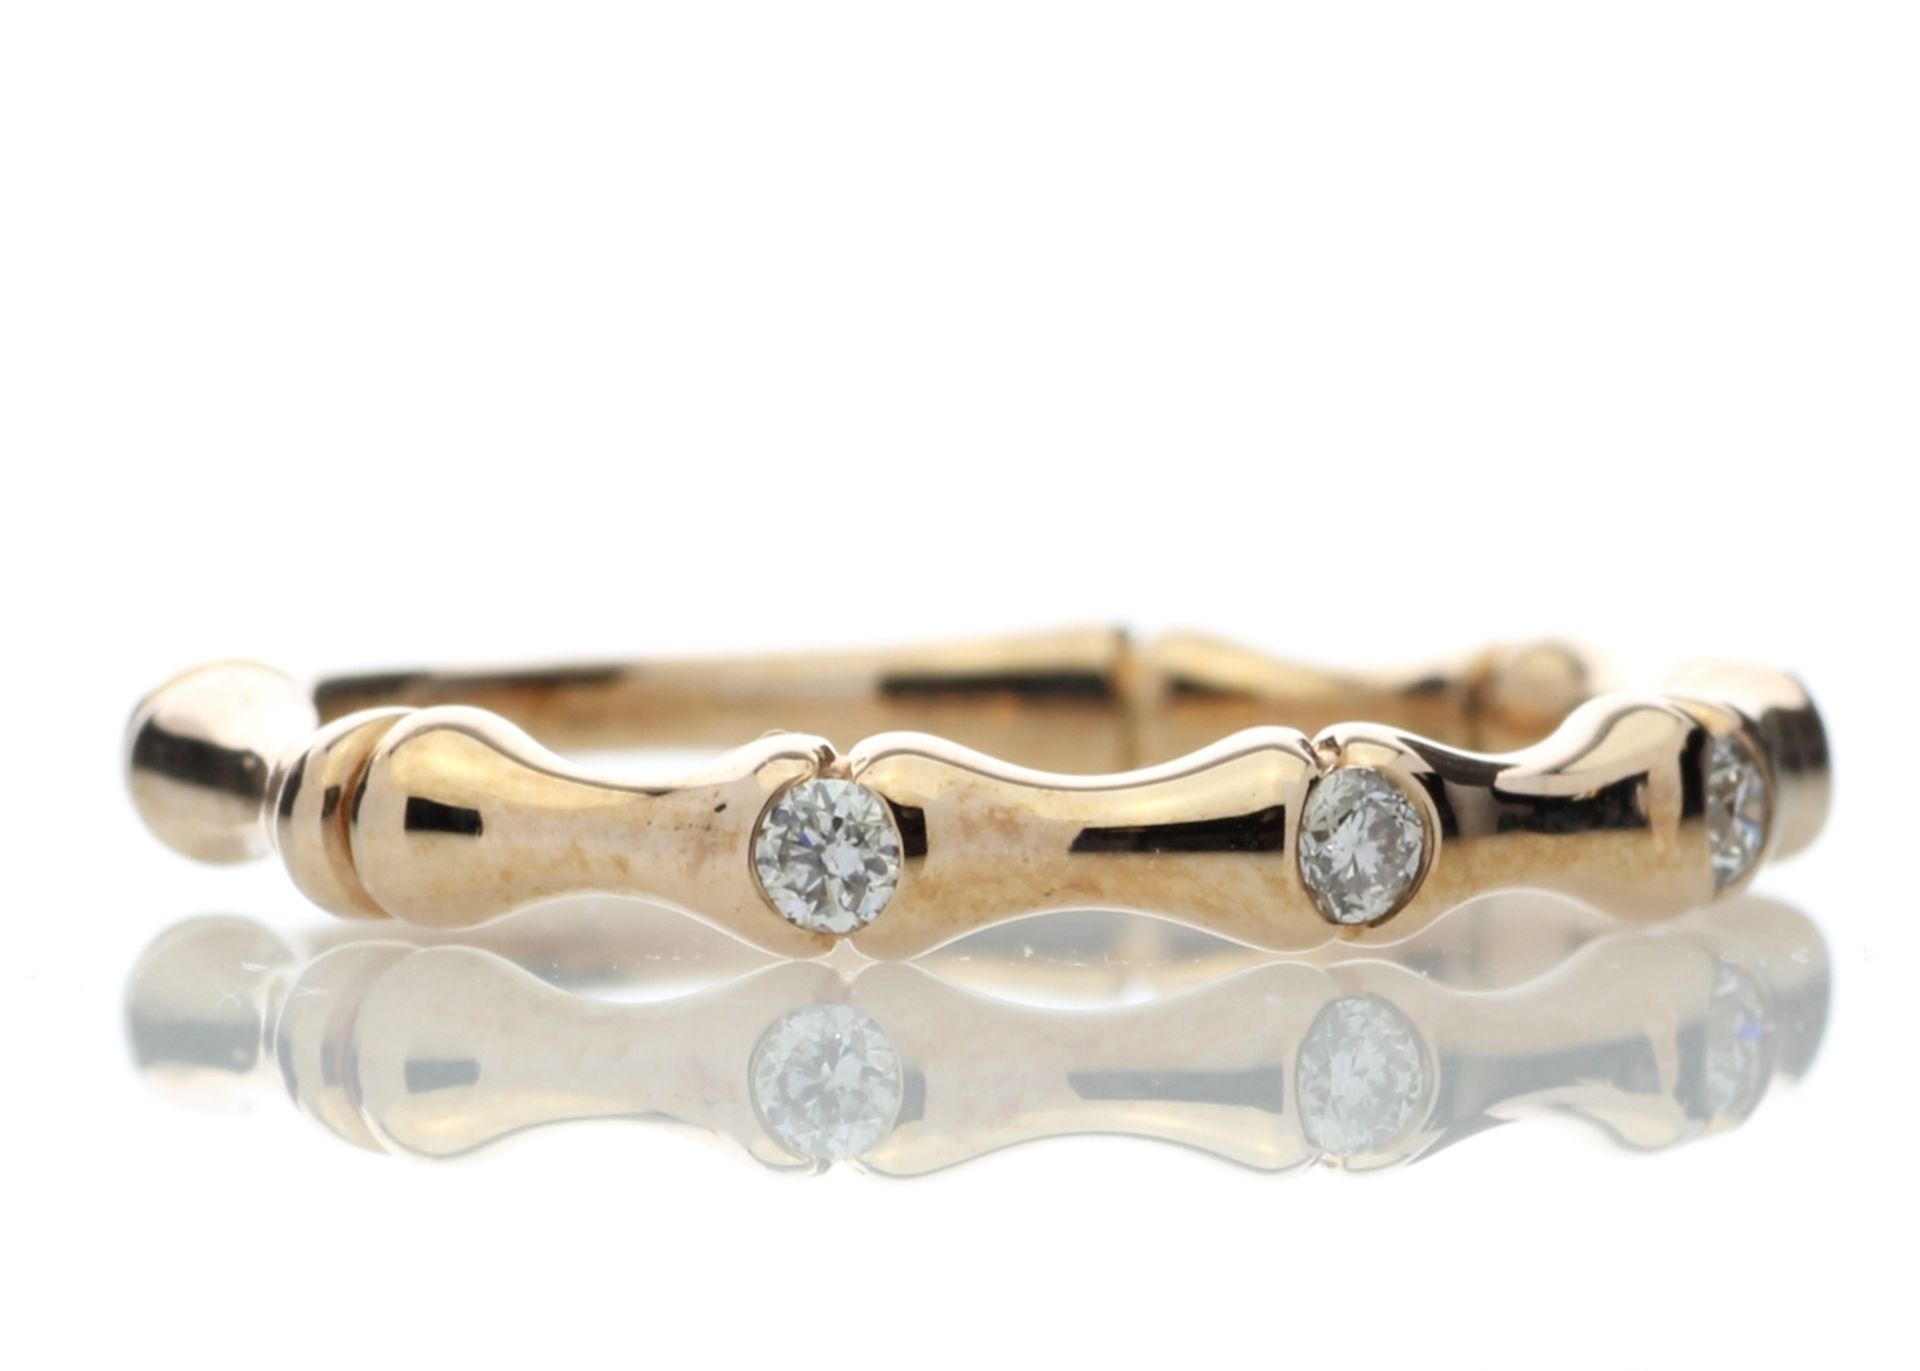 9ct Rose Gold Diamond Ring 0.12 Carats - Valued By IDI £2,585.00 - Four round brilliant cut diamonds - Image 4 of 5